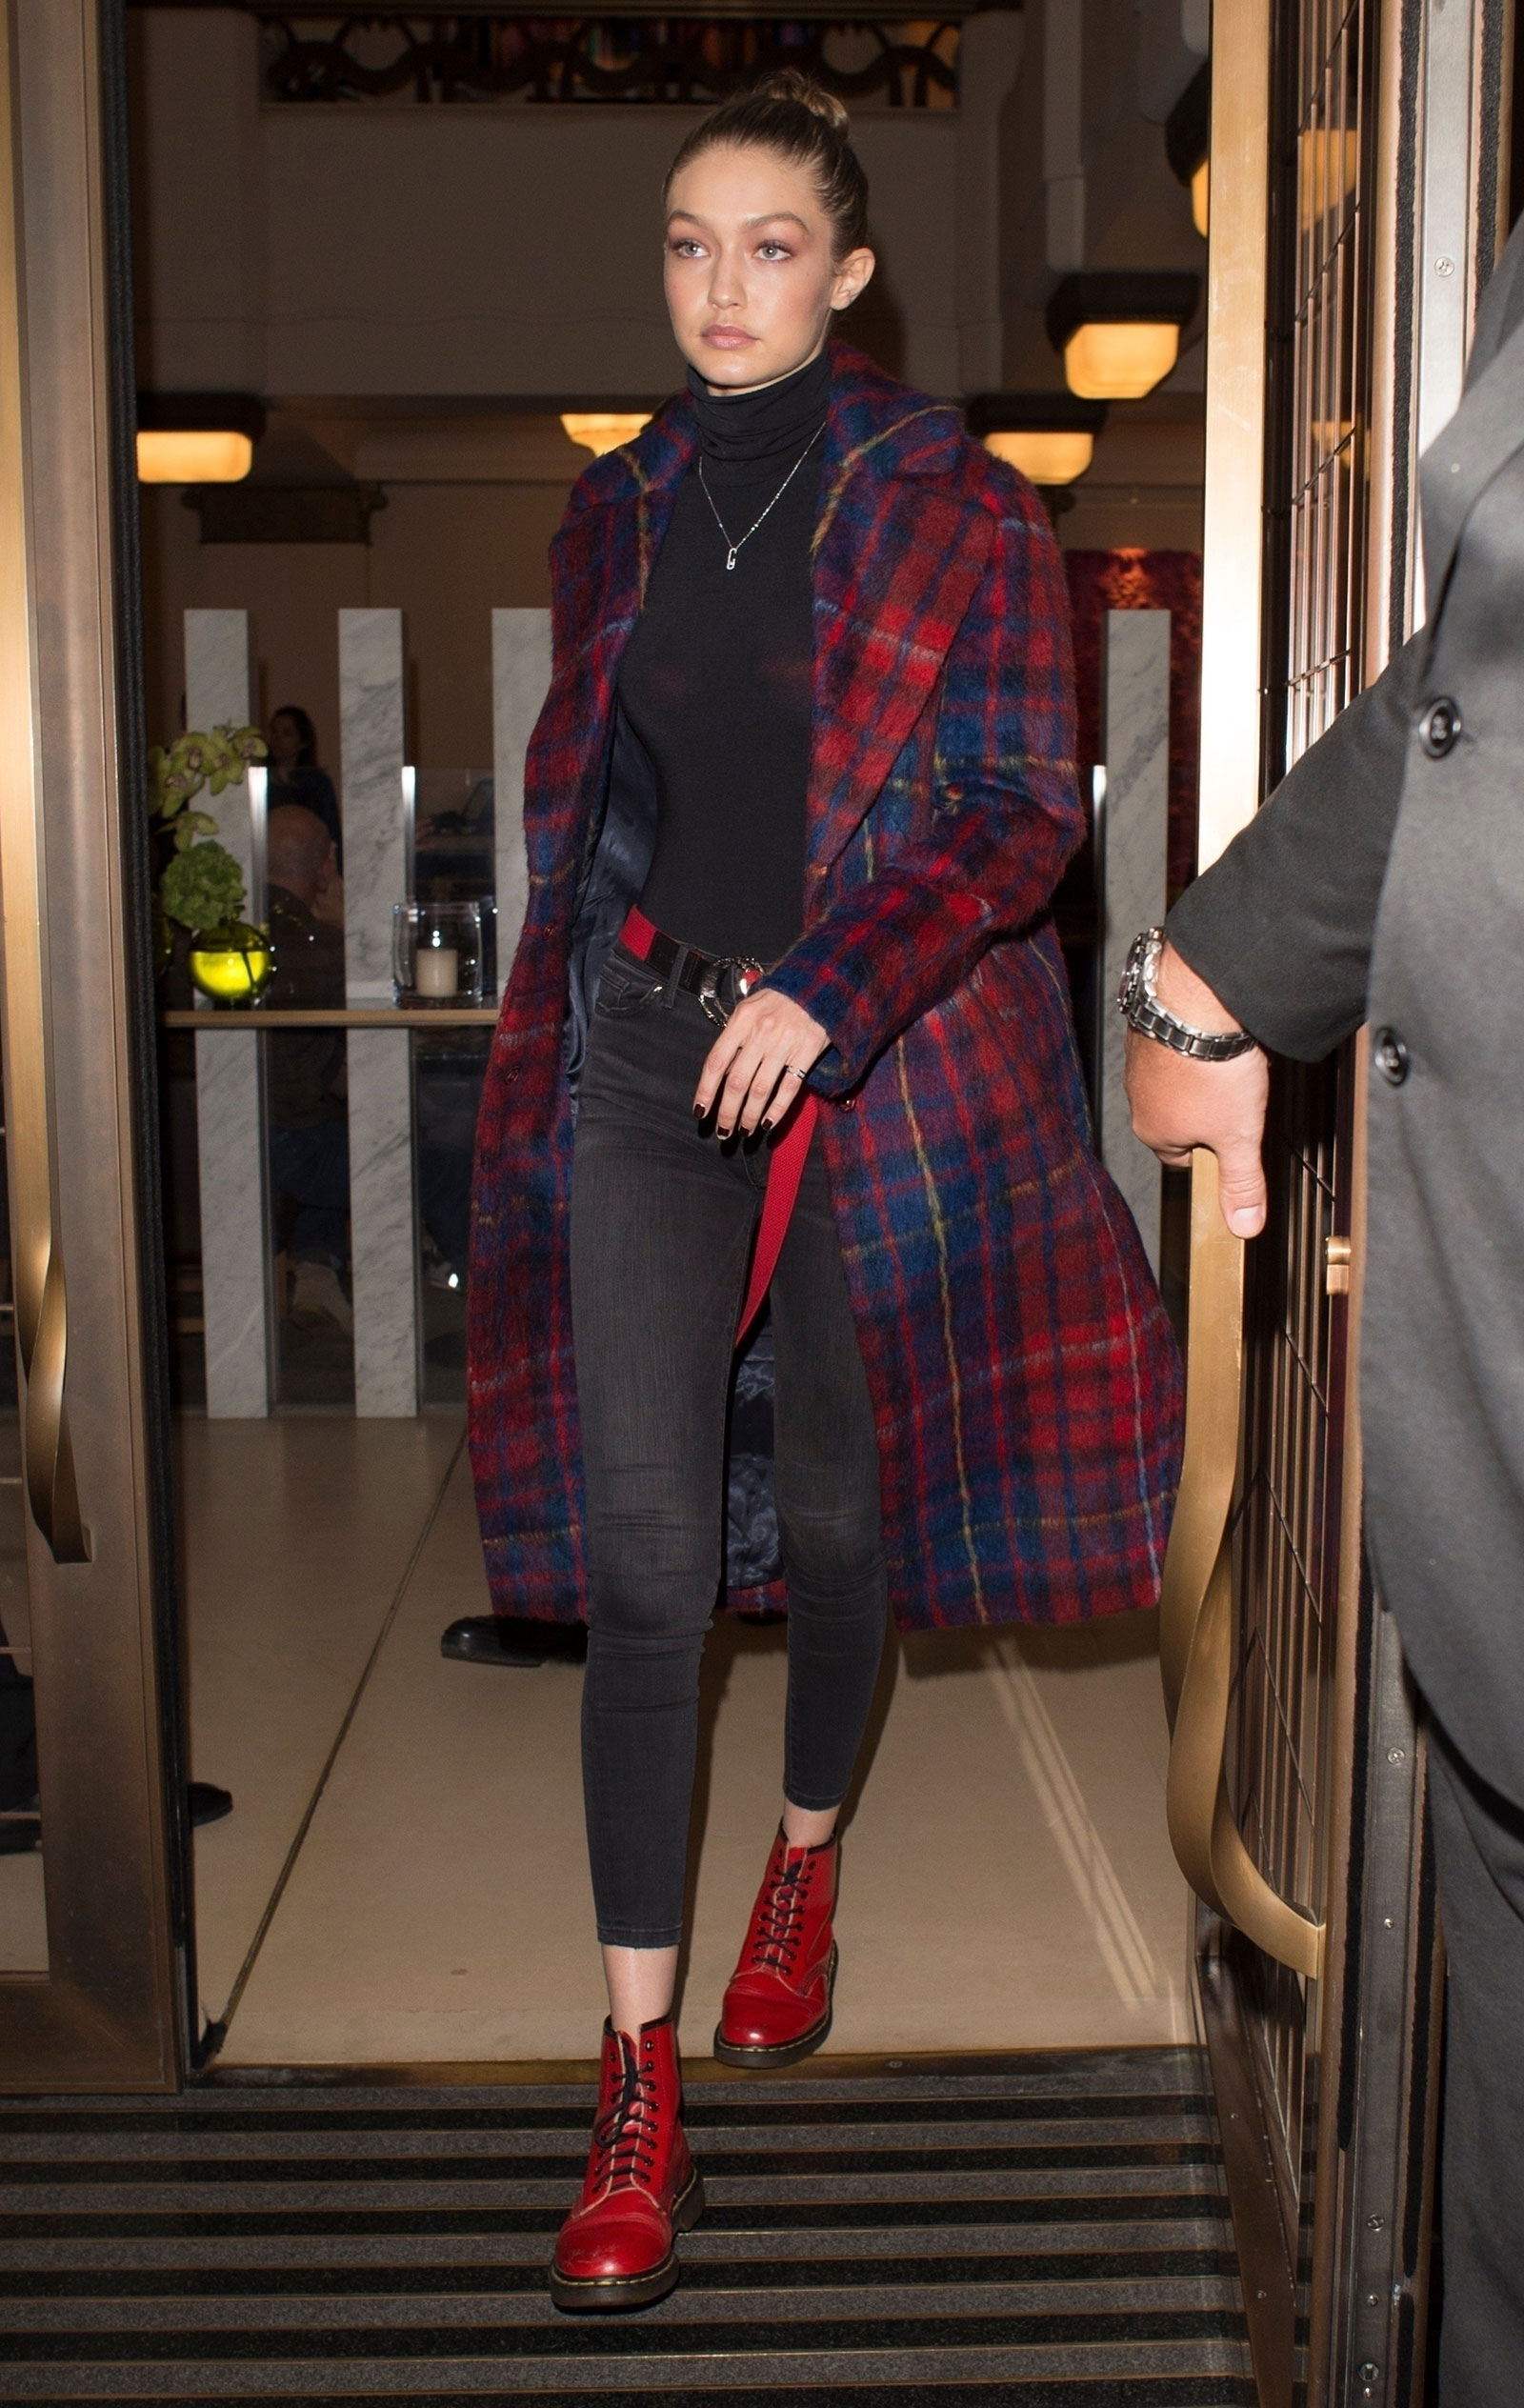 Snooze Cataract ammunition Gigi Hadid's Plaid Coat and Red Combat Boots Look for Less - The Budget  Babe | Affordable Fashion & Style Blog